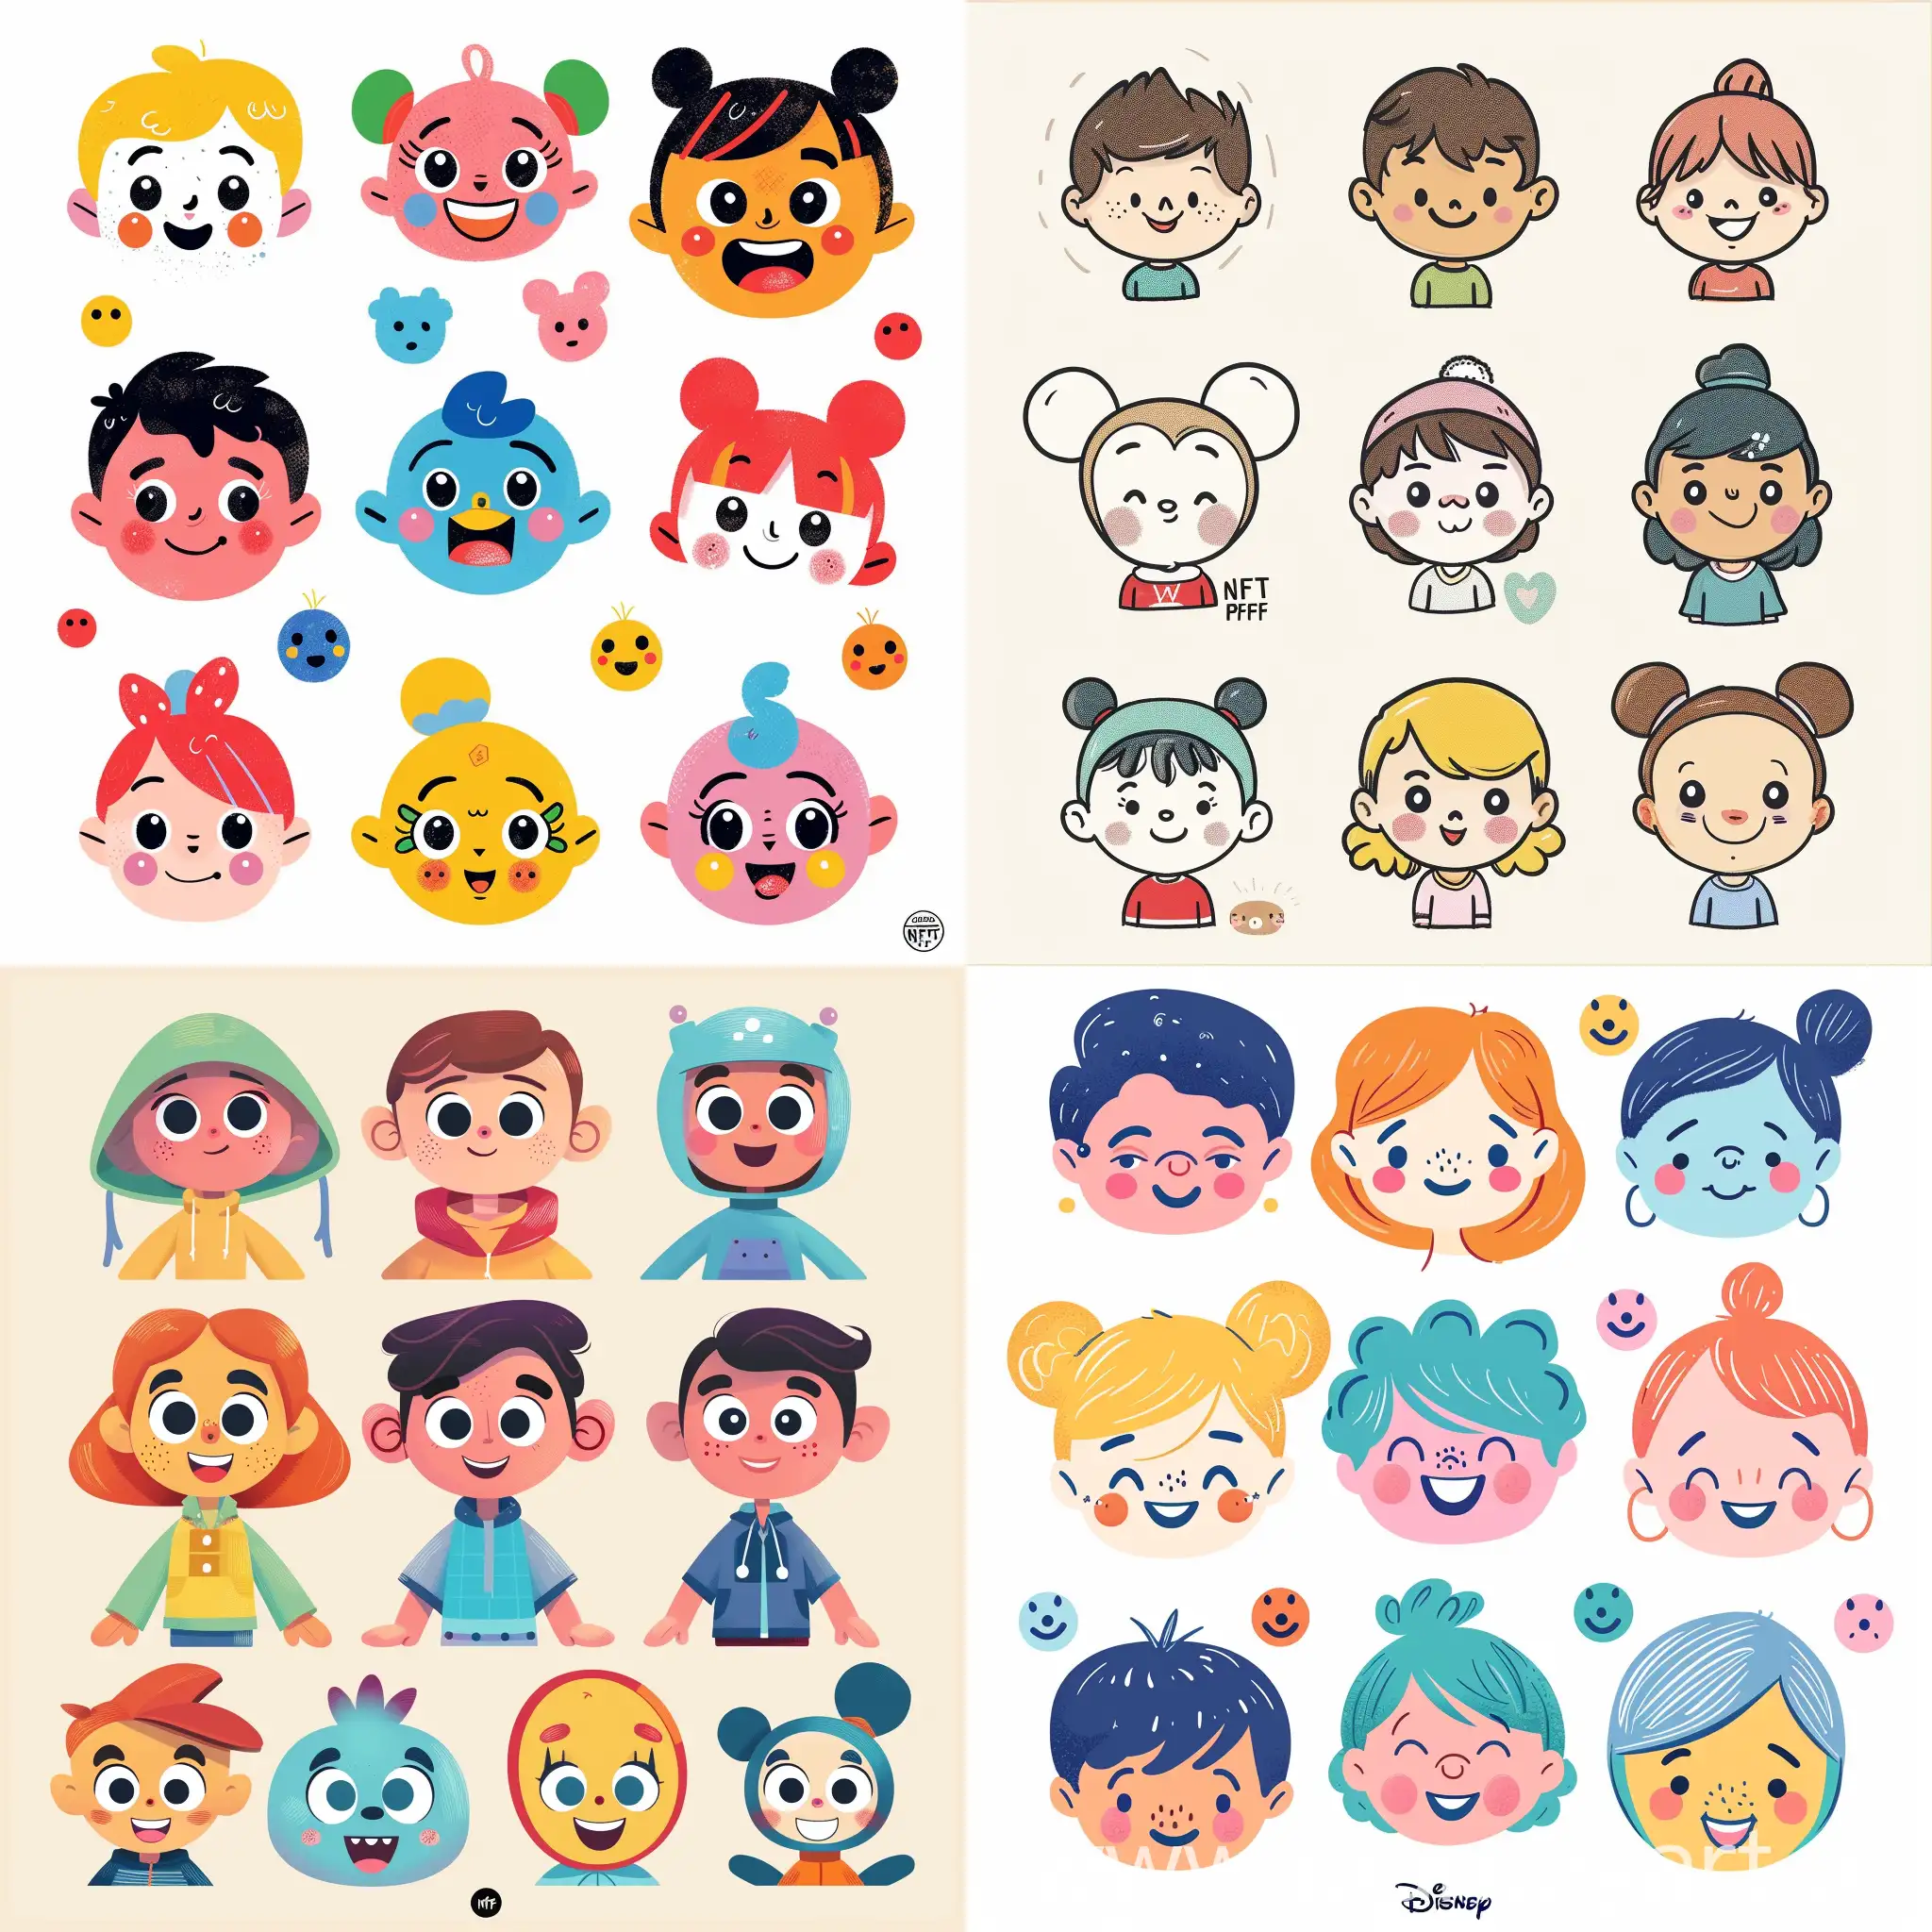 Make an nft pfp collection thats colorful but simple, like the doodles collection

good, make them people, smiling

good, make them rounder and smoother, and polished. incorporate some disney but keep their eyes beedy

make them more basic and like smiley faces

make the eyes dots